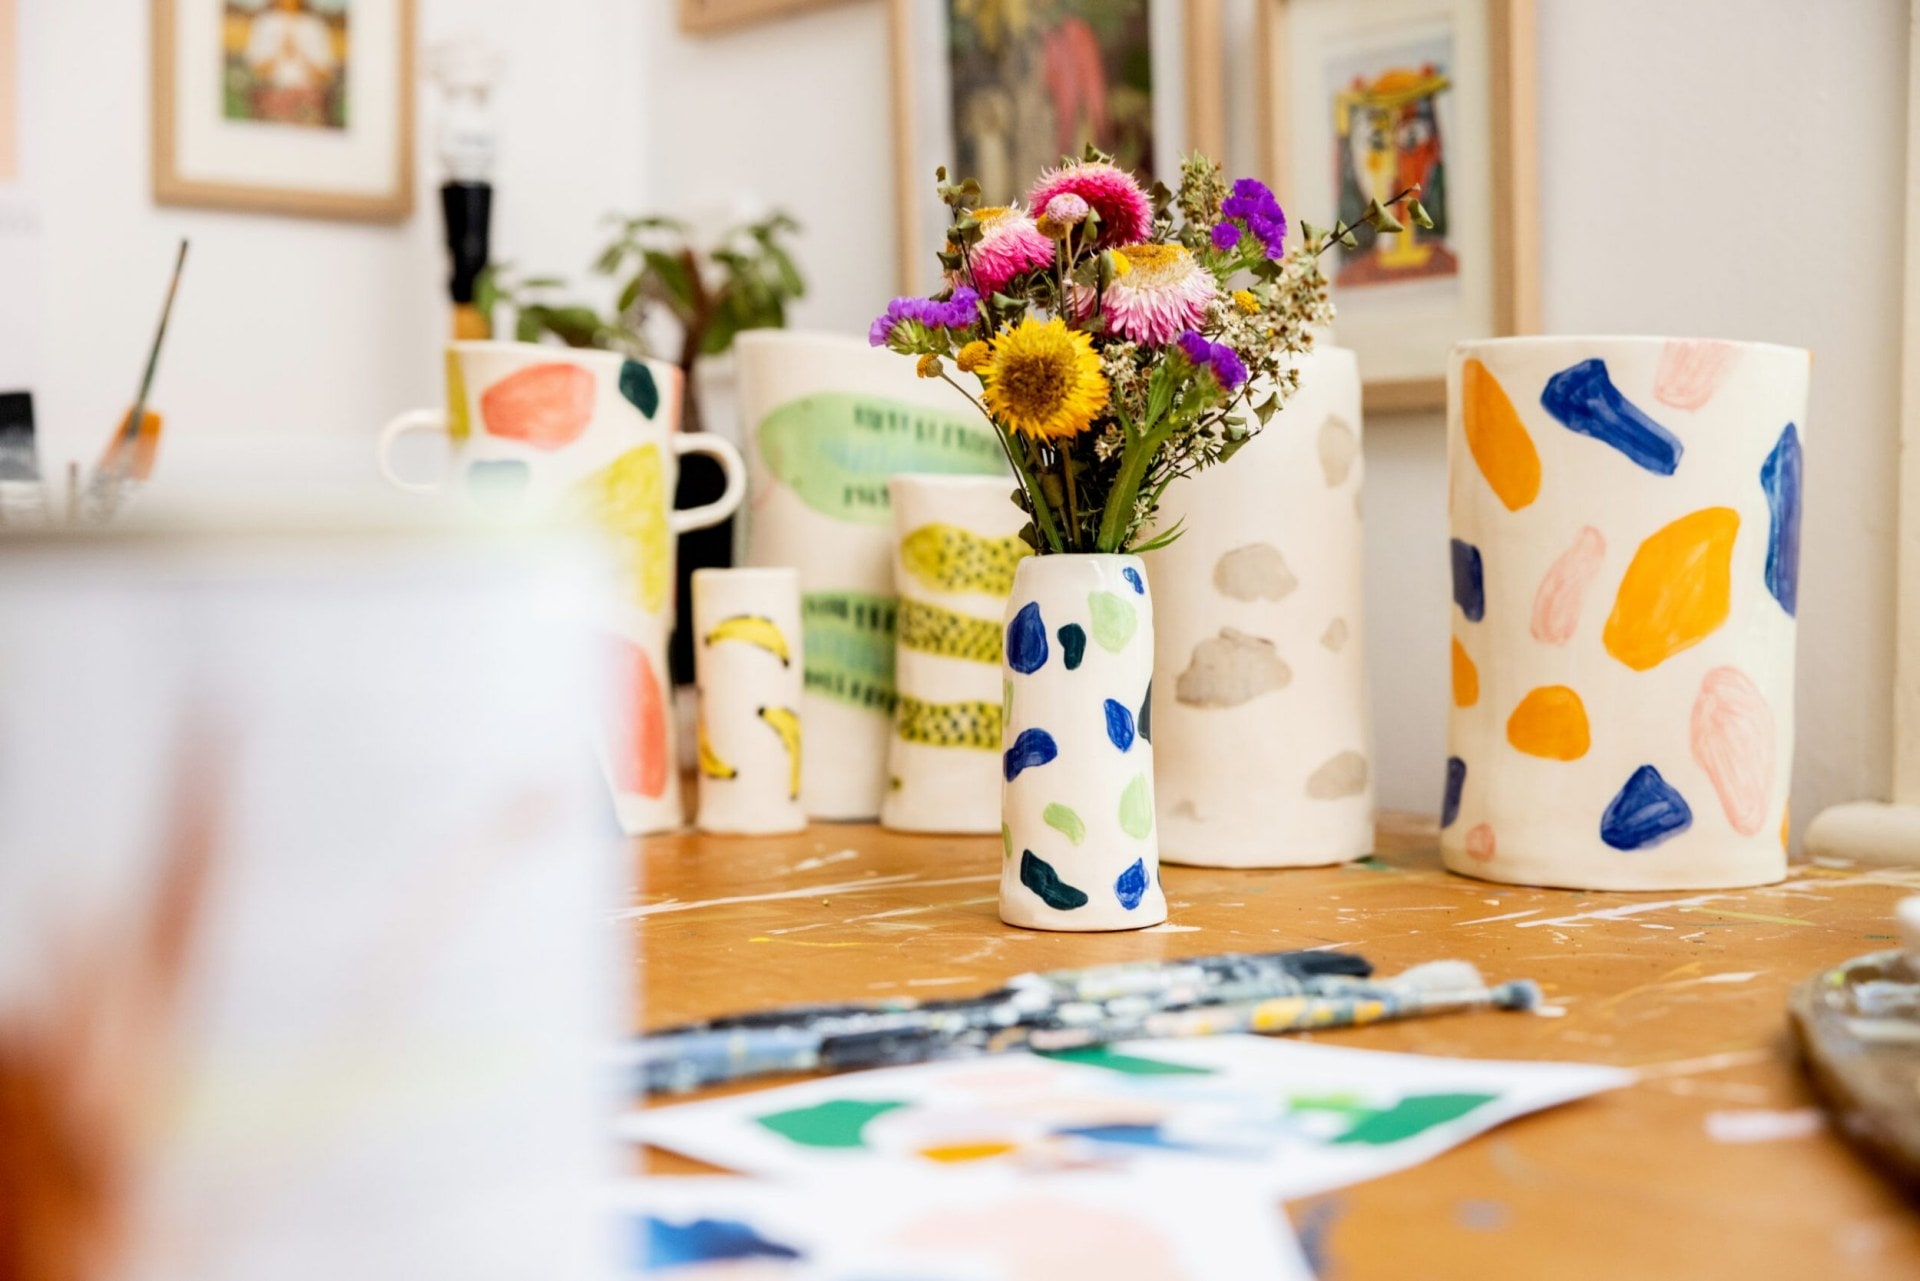 Collection of Alice Berry's ceramic vases on wooden table